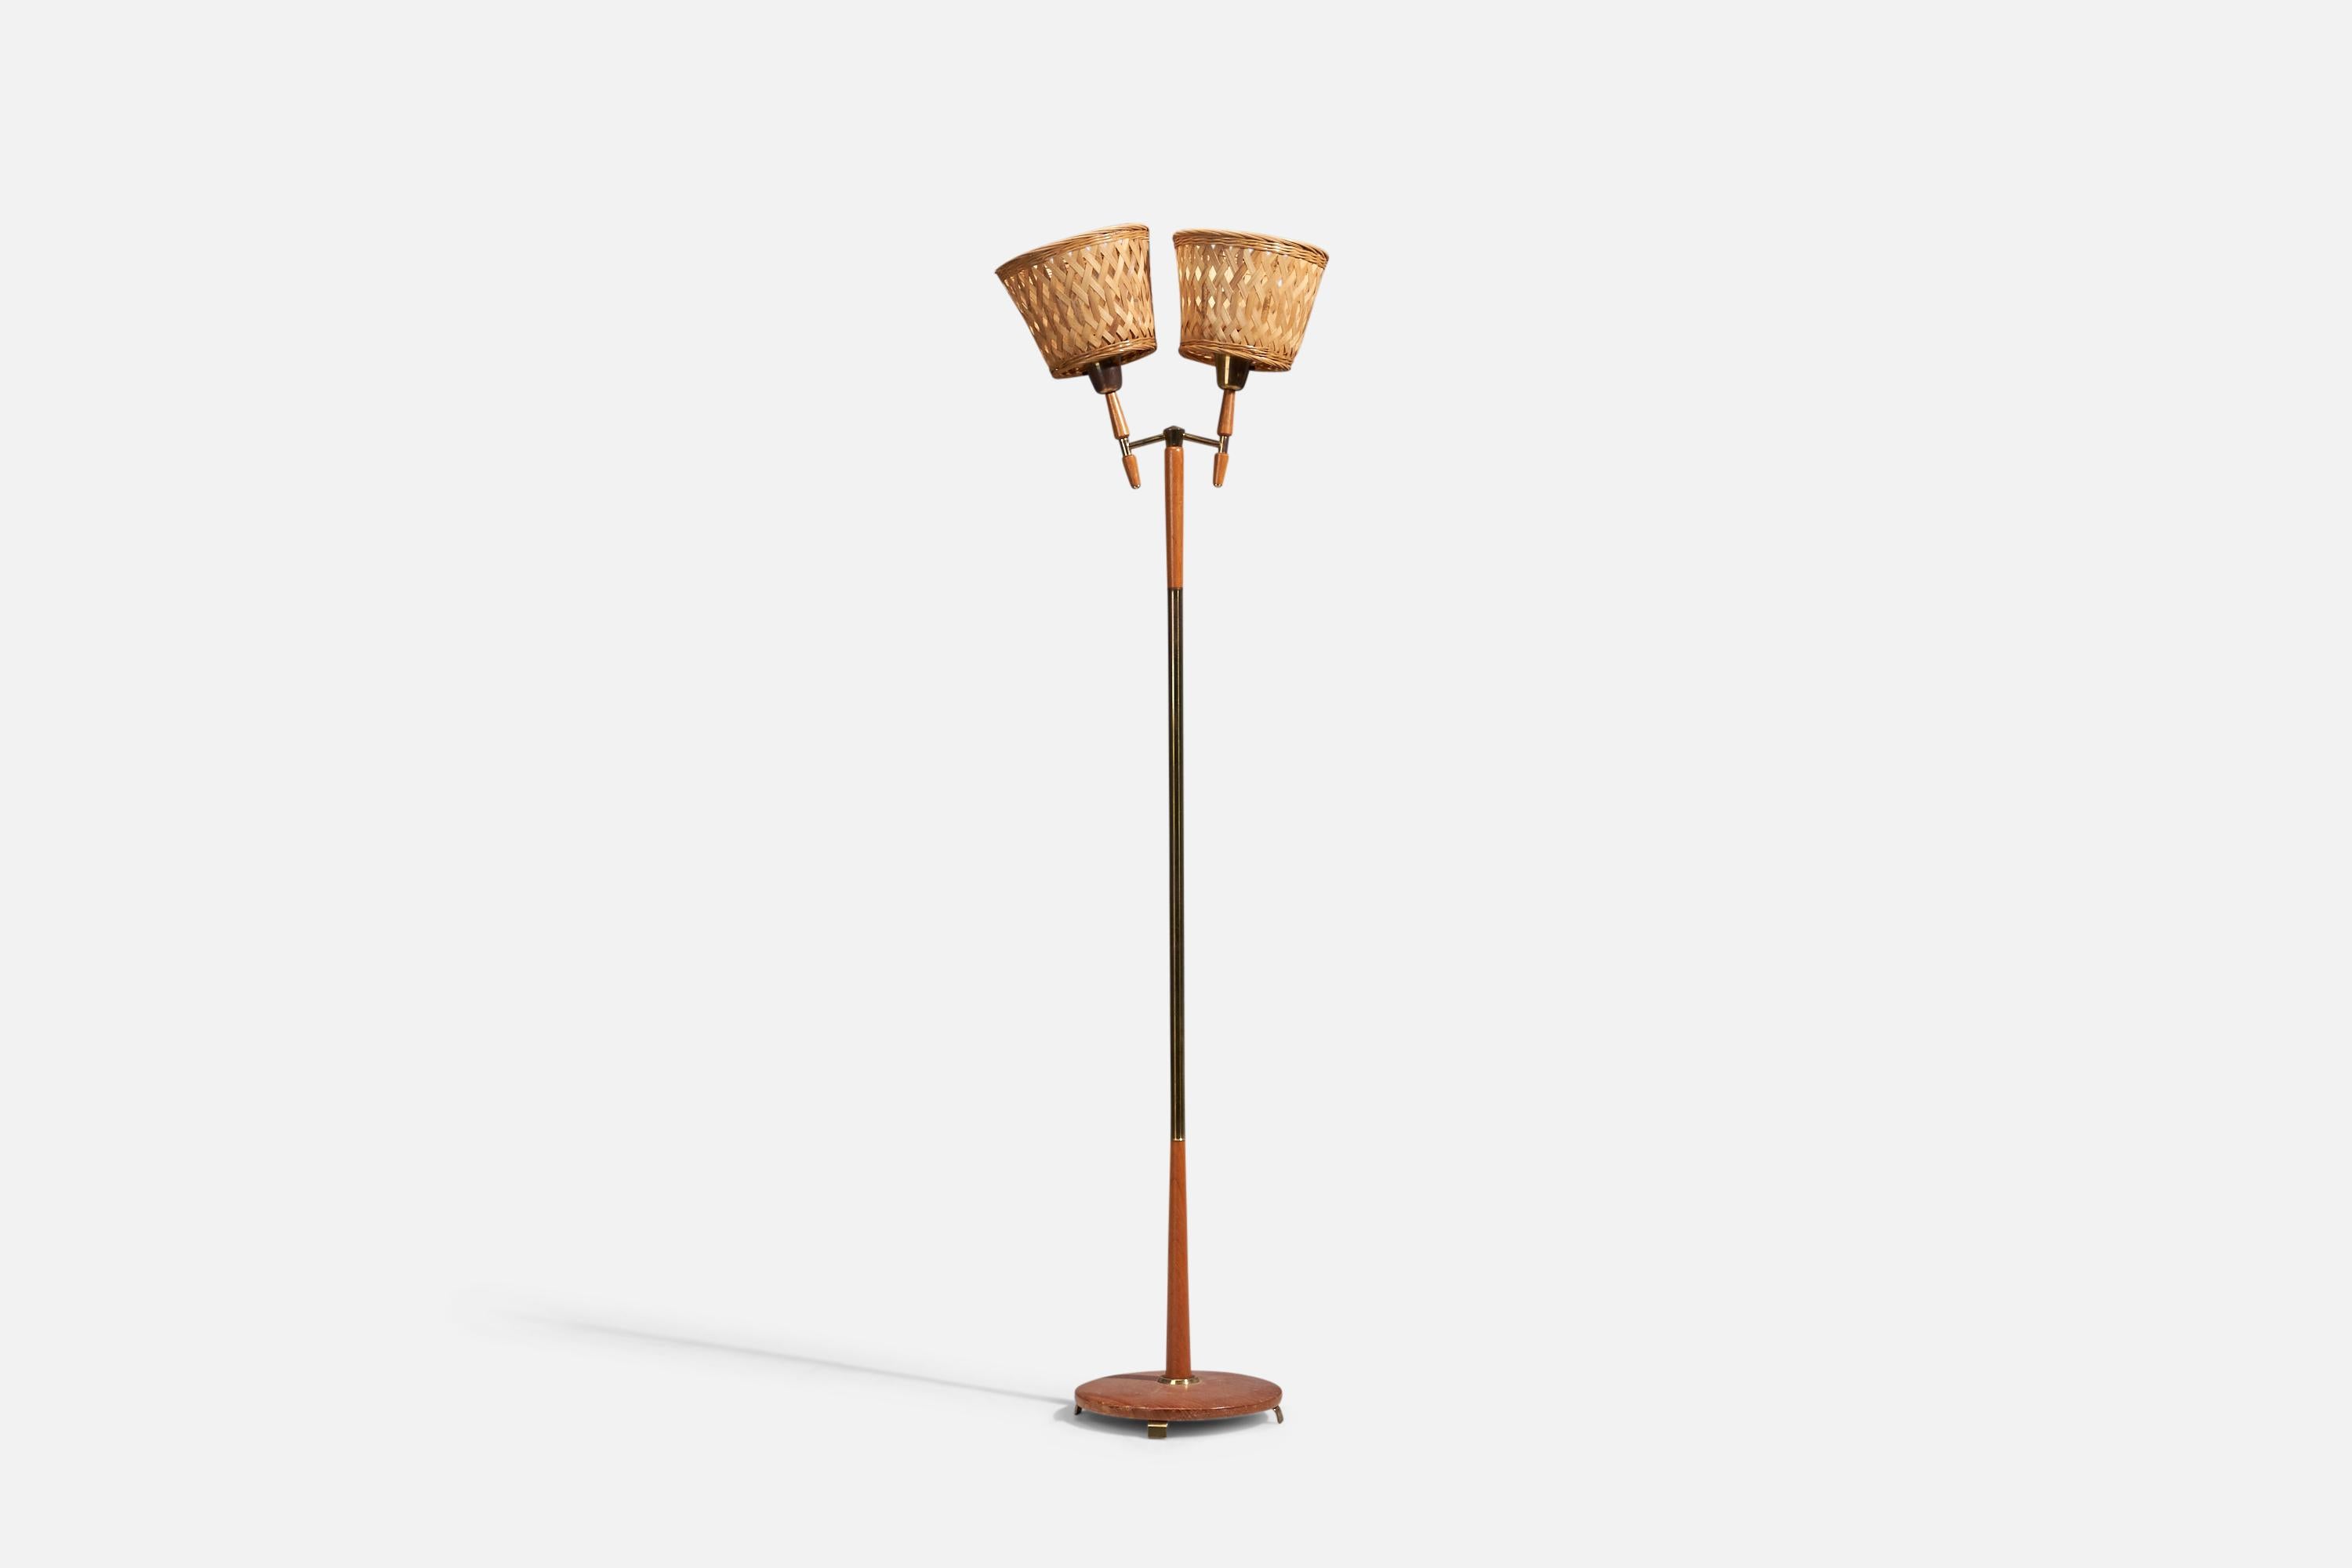 A brass, teak and rattan floor lamp designed and produced in Sweden, 1950s

Sold with Lampshades. Dimensions stated are of Floor Lamp with Lampshades.

Sockets take standard E-26 medium base bulbs.

There is no maximum wattage stated on the